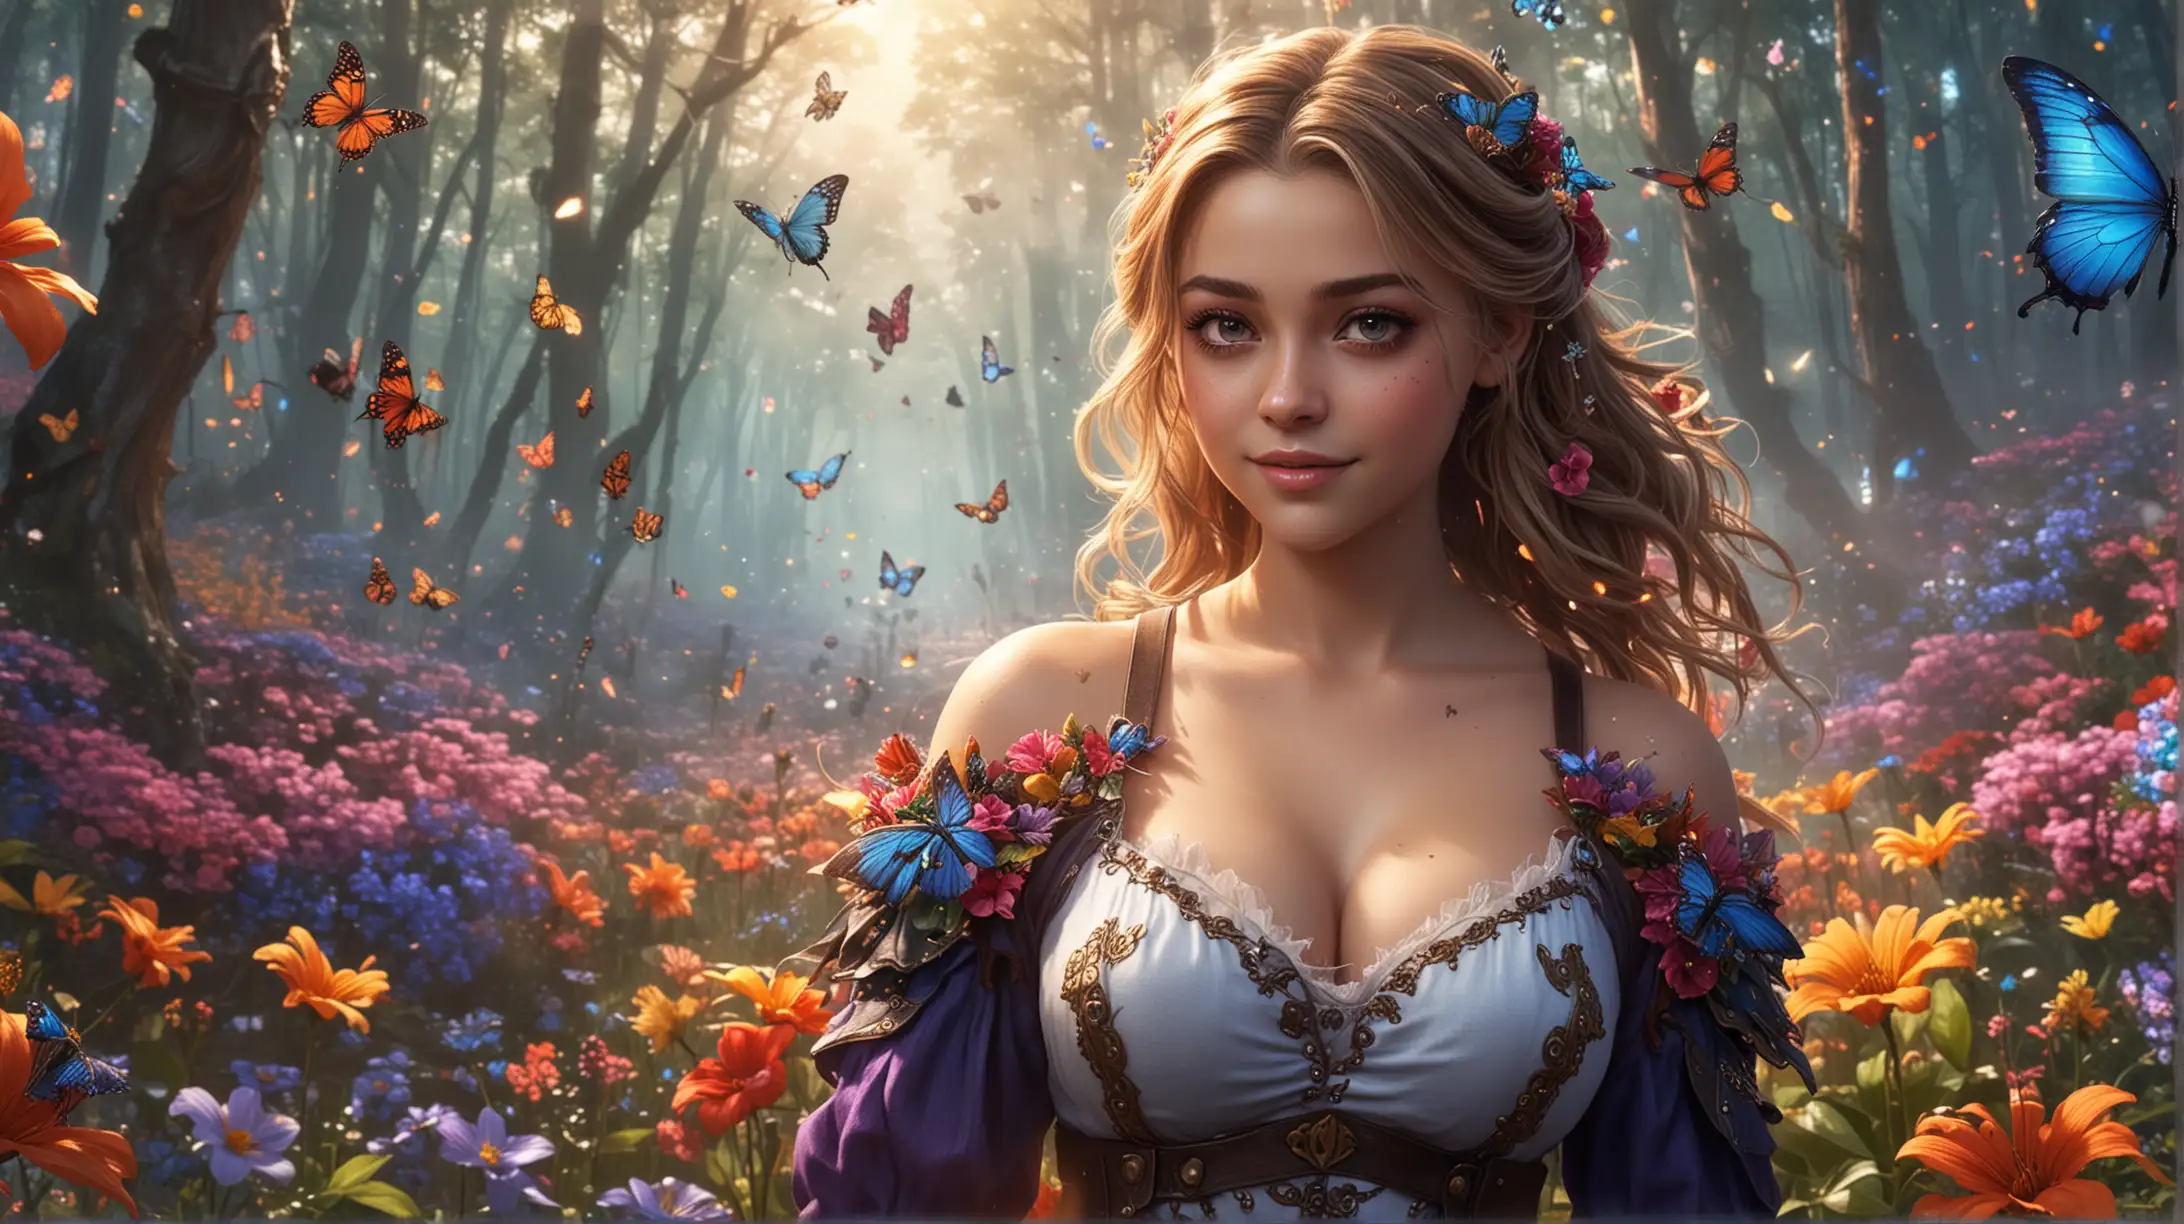 cartoon, Josephine Langford, final fantasy game, sexy clothes, big boobs, big eyes, surrounded by gorgeous colorful flowers, butterflies, fantasy forest, smile, magic, fire, fog